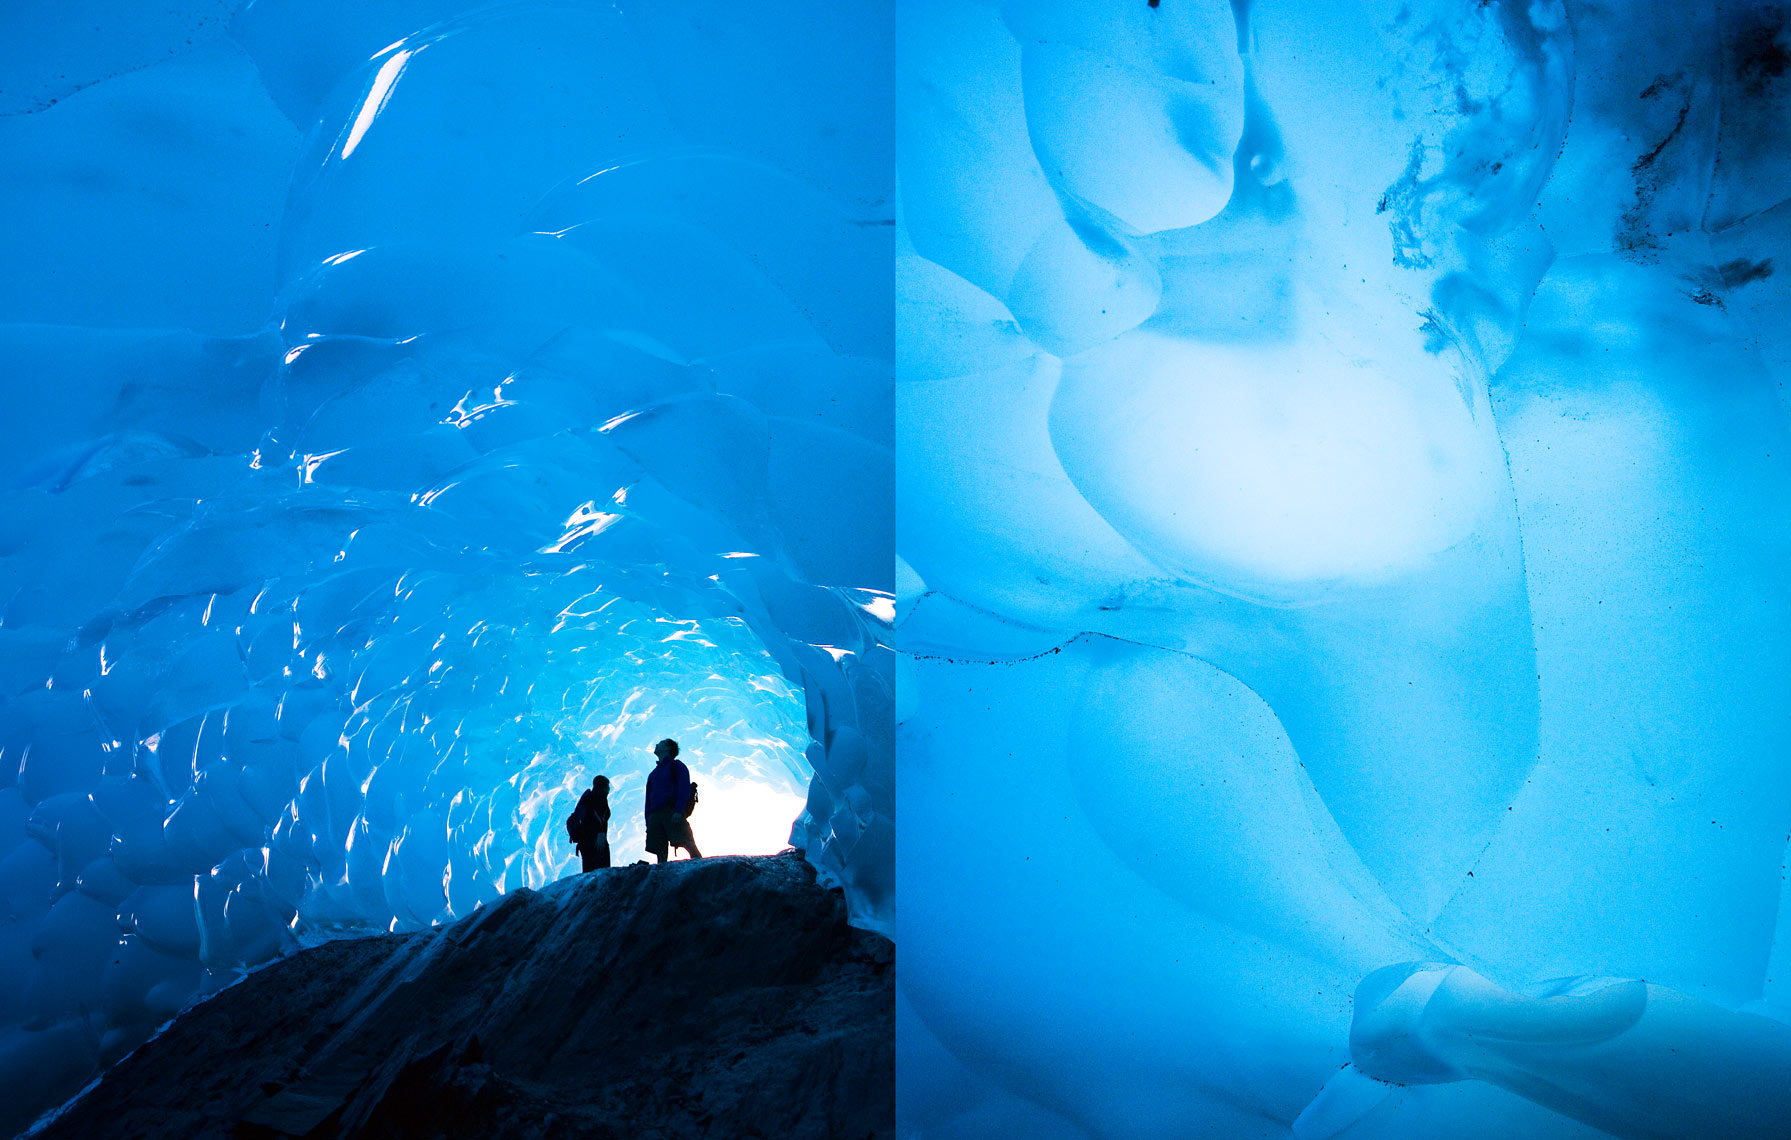  The view from inside a glowing blue ice cave in the Mendenhall glacier in Alaska. Travel and adventure photo.